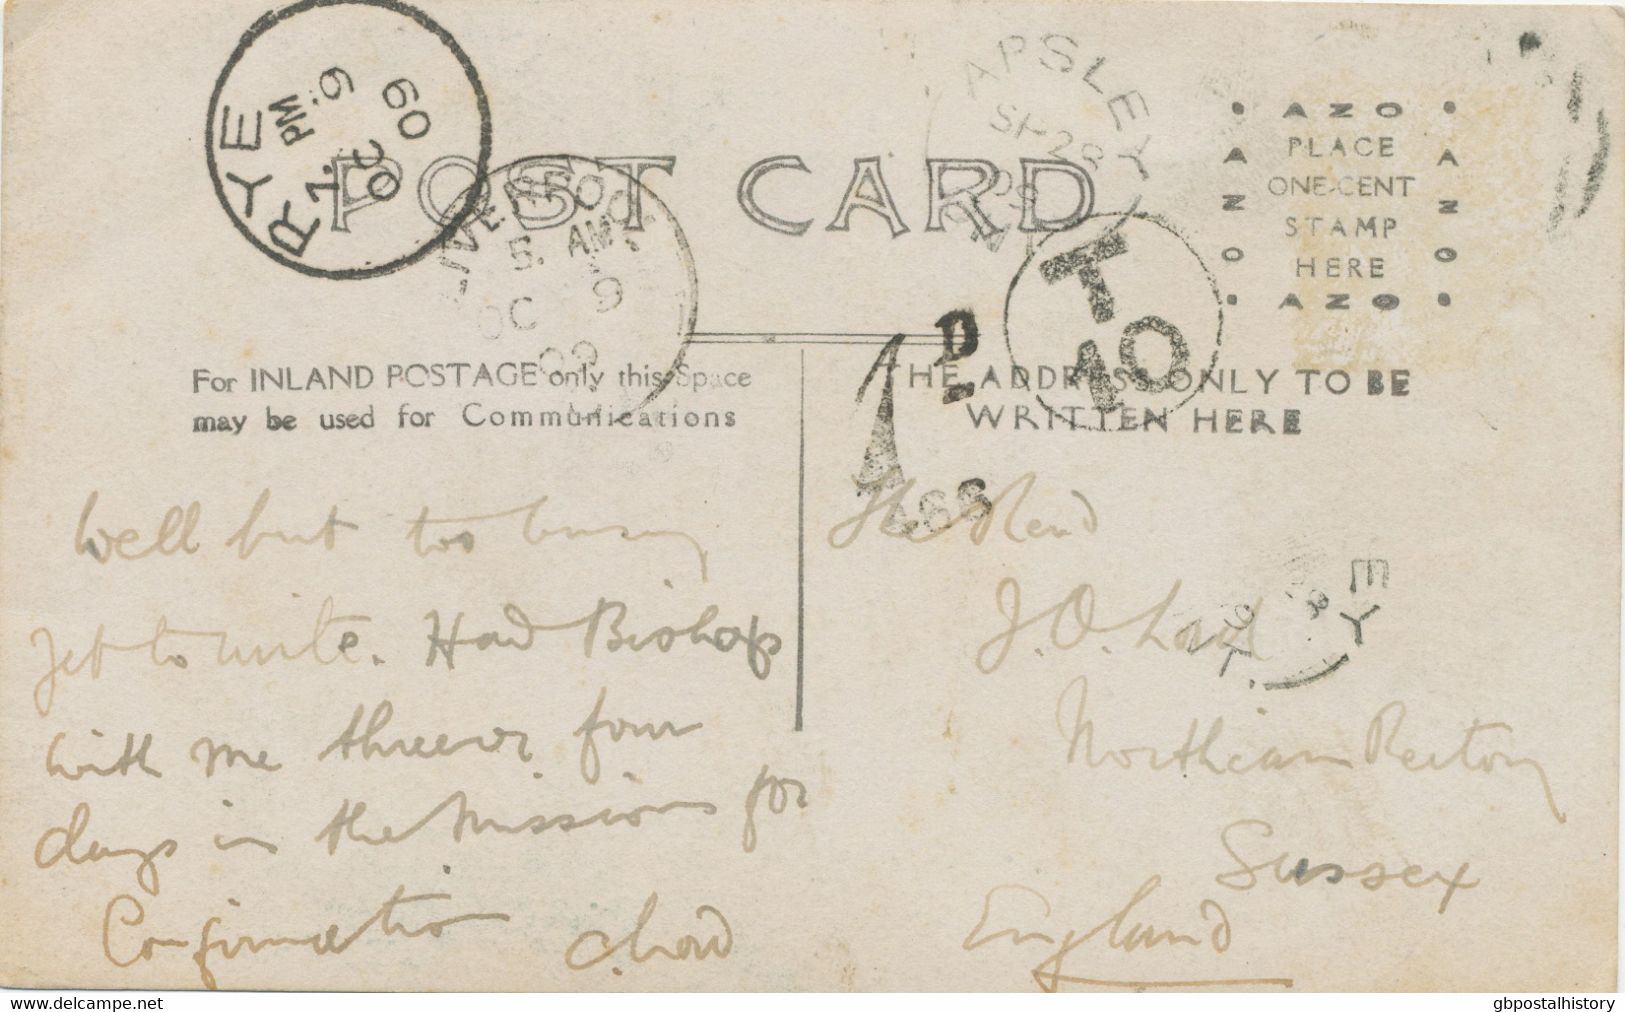 GB VILLAGE POSTMARKS "1 D. 466" (LIVERPOOL, Lancashire) POSTAGE DUE Postmark On Pc From „APSLEY / ONT“ Single Arc Canada - Strafportzegels